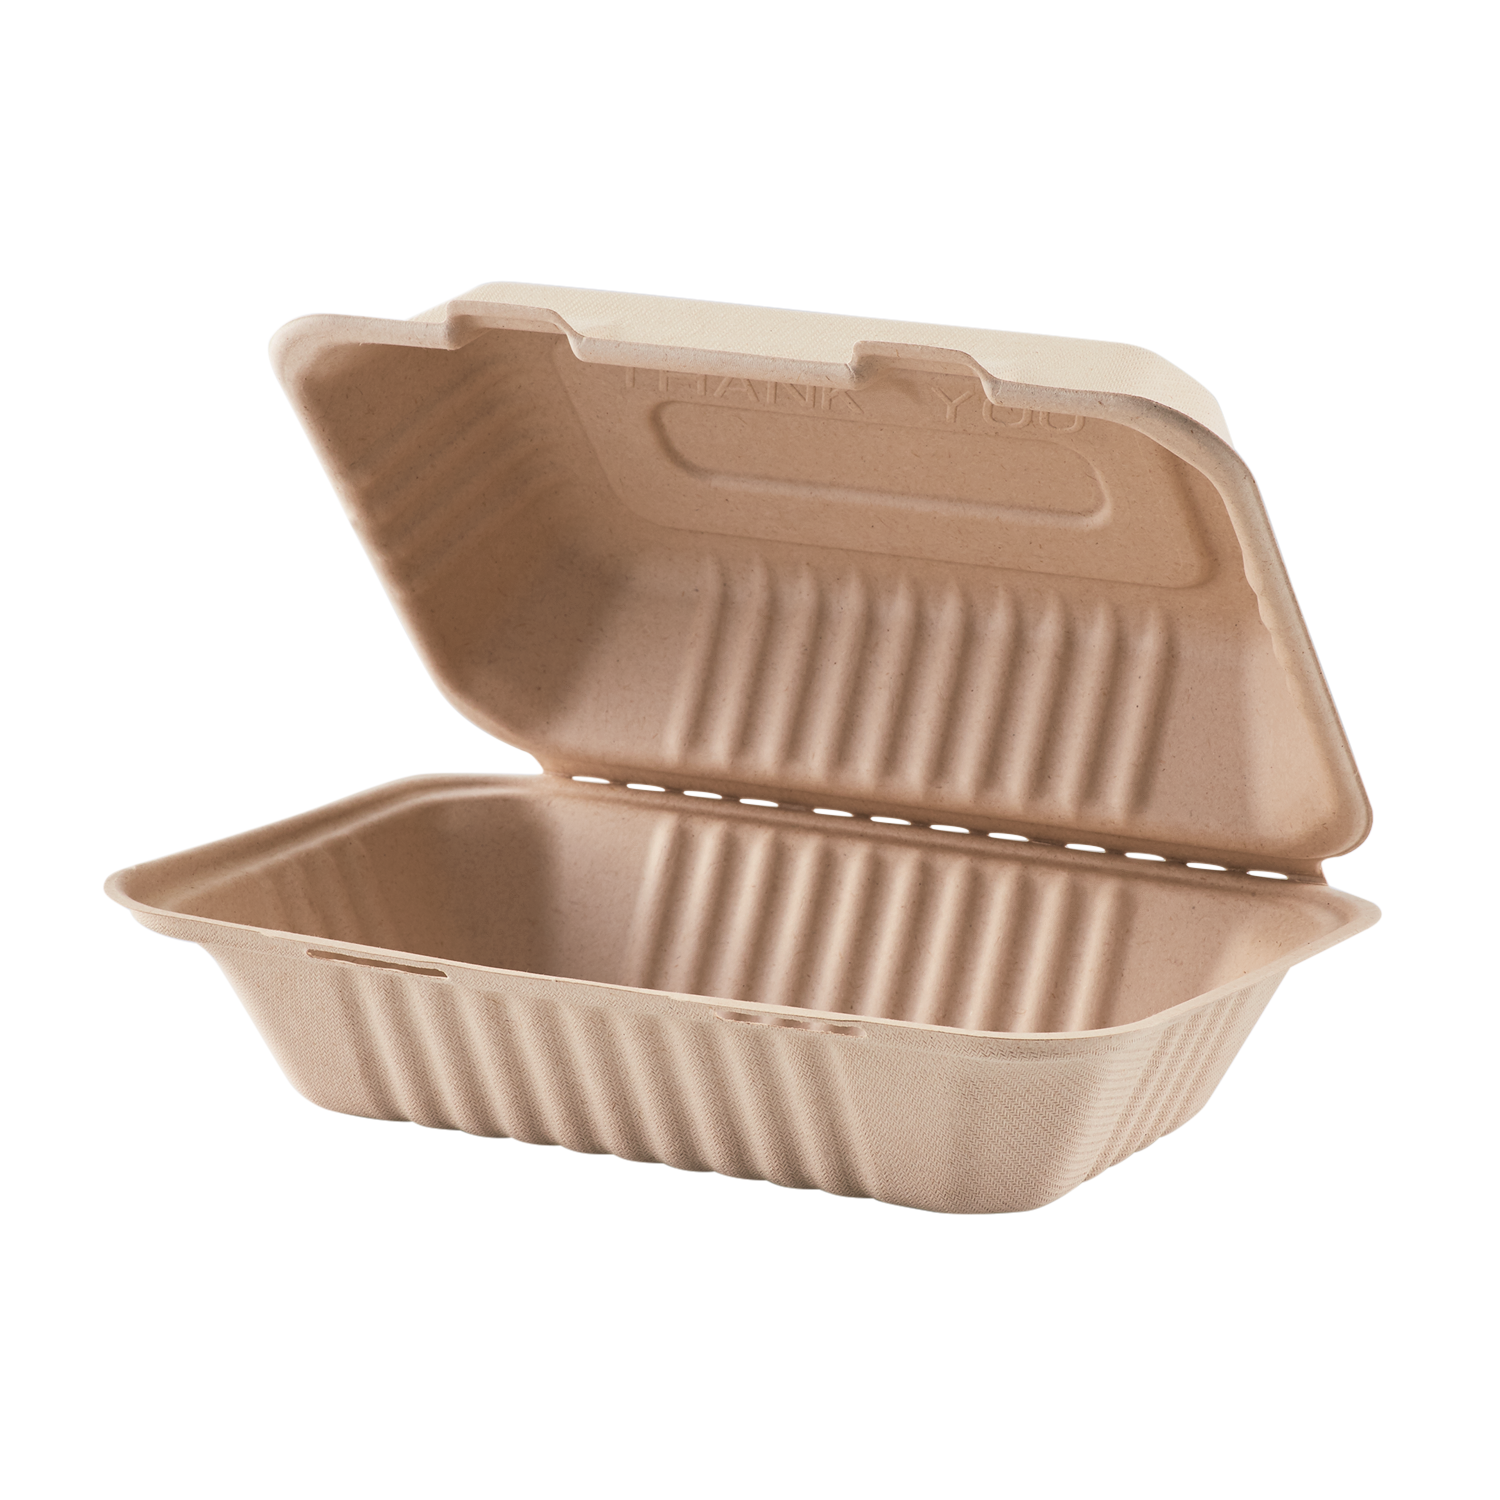 Customize Baggase Biodegradable Paper Cup Holder Takeout Cup Tray